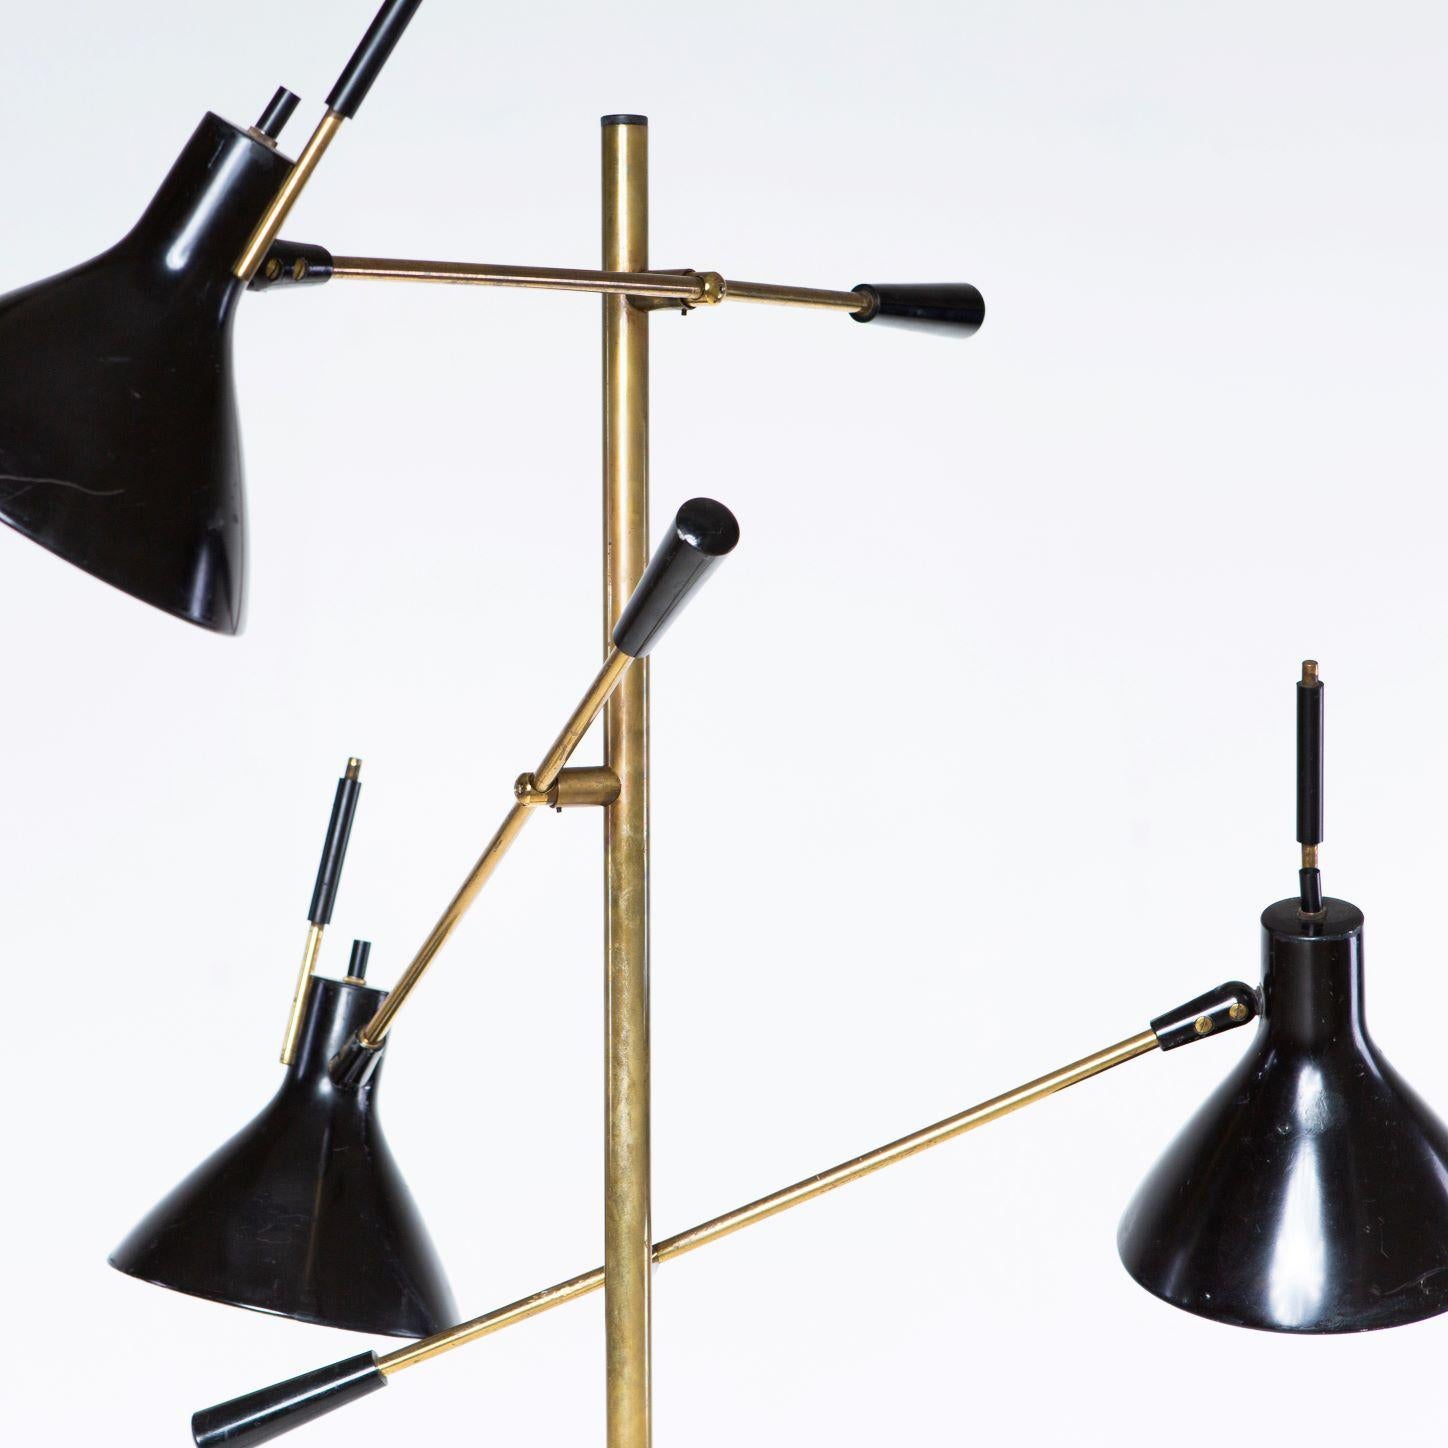 Rare and early Arredoluce Triennale Floor Lamp, Marble base,
original black enameled shades and details, patinated brass. 
Including original labels.

Base Diameter: 10 